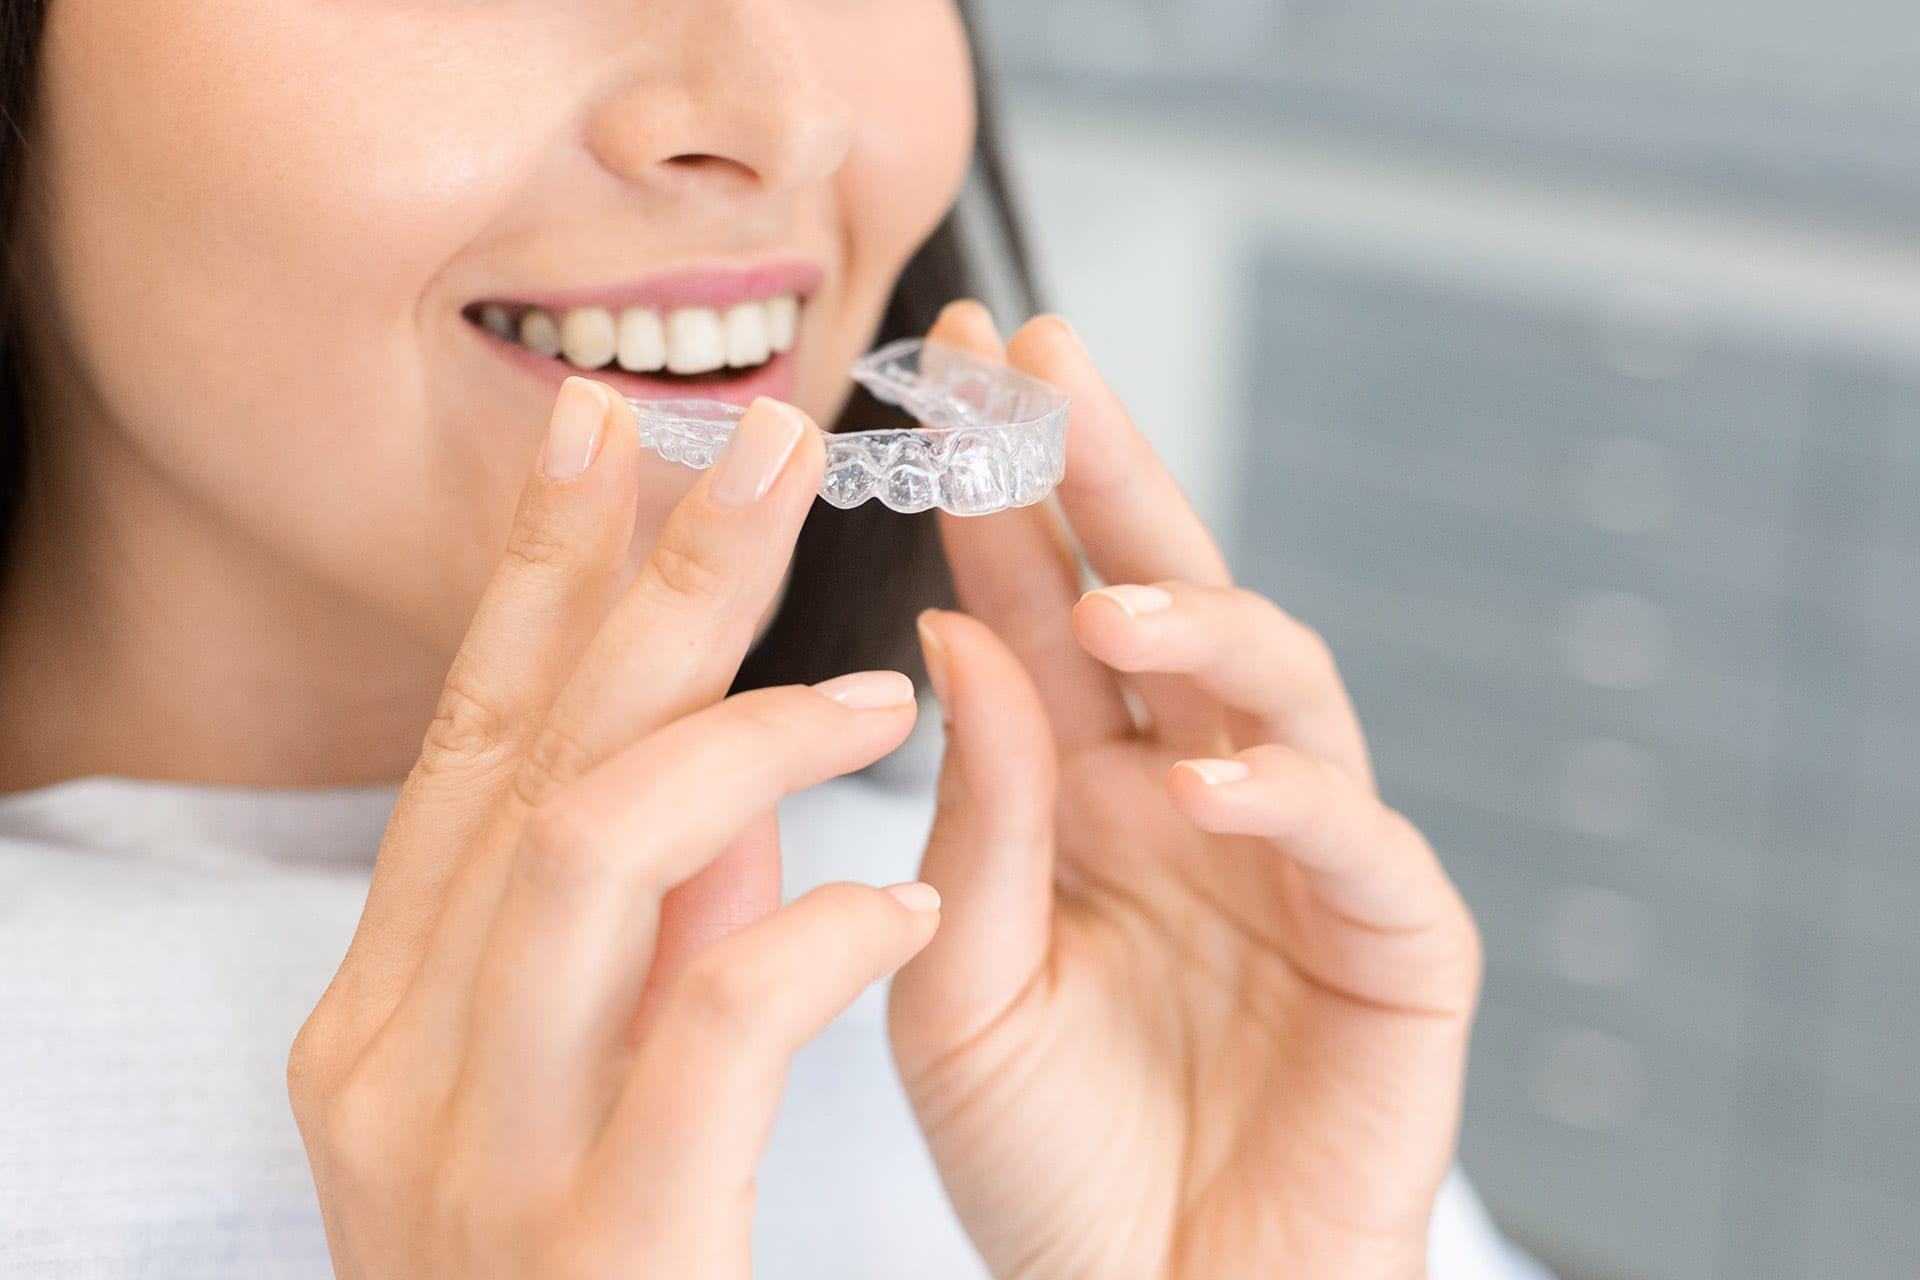 Woman in inserts an Invisalign clear orthodontic aligner from best dentist in Folsom, CA